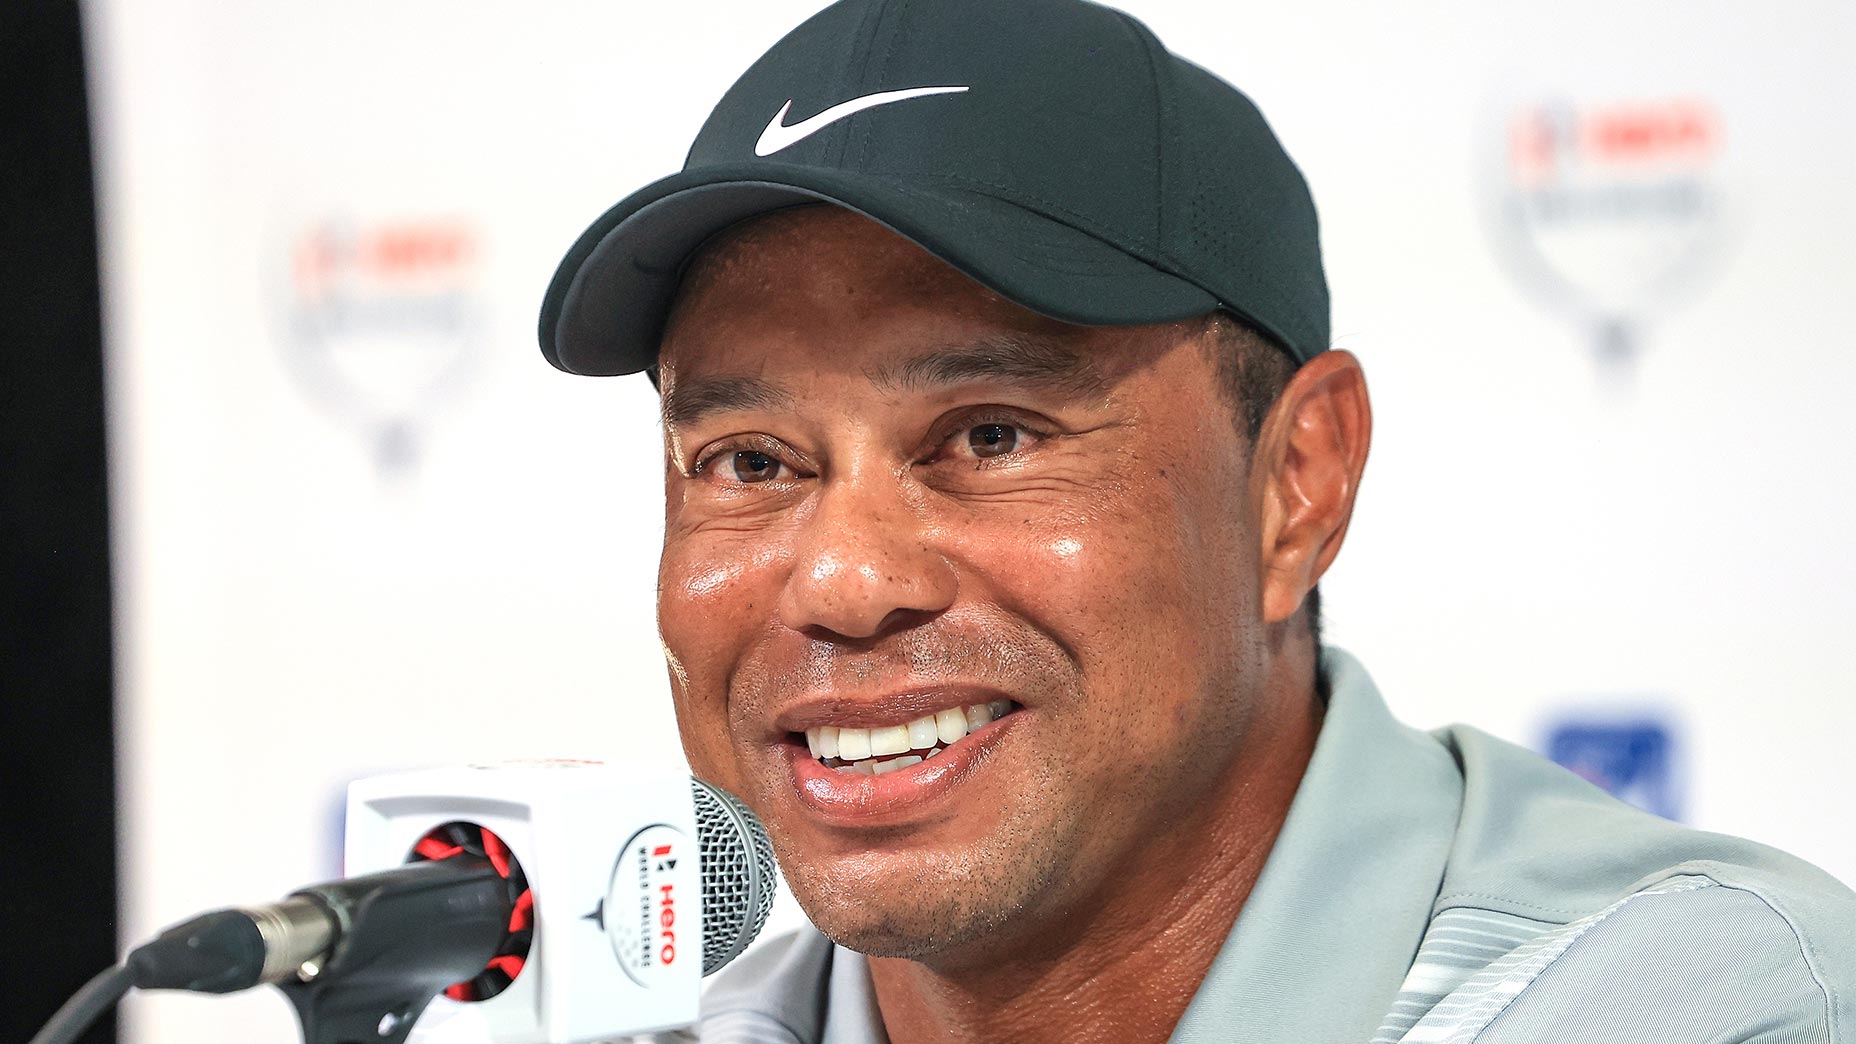 tiger woods smiles from podium at hero world challenge in front of microphone